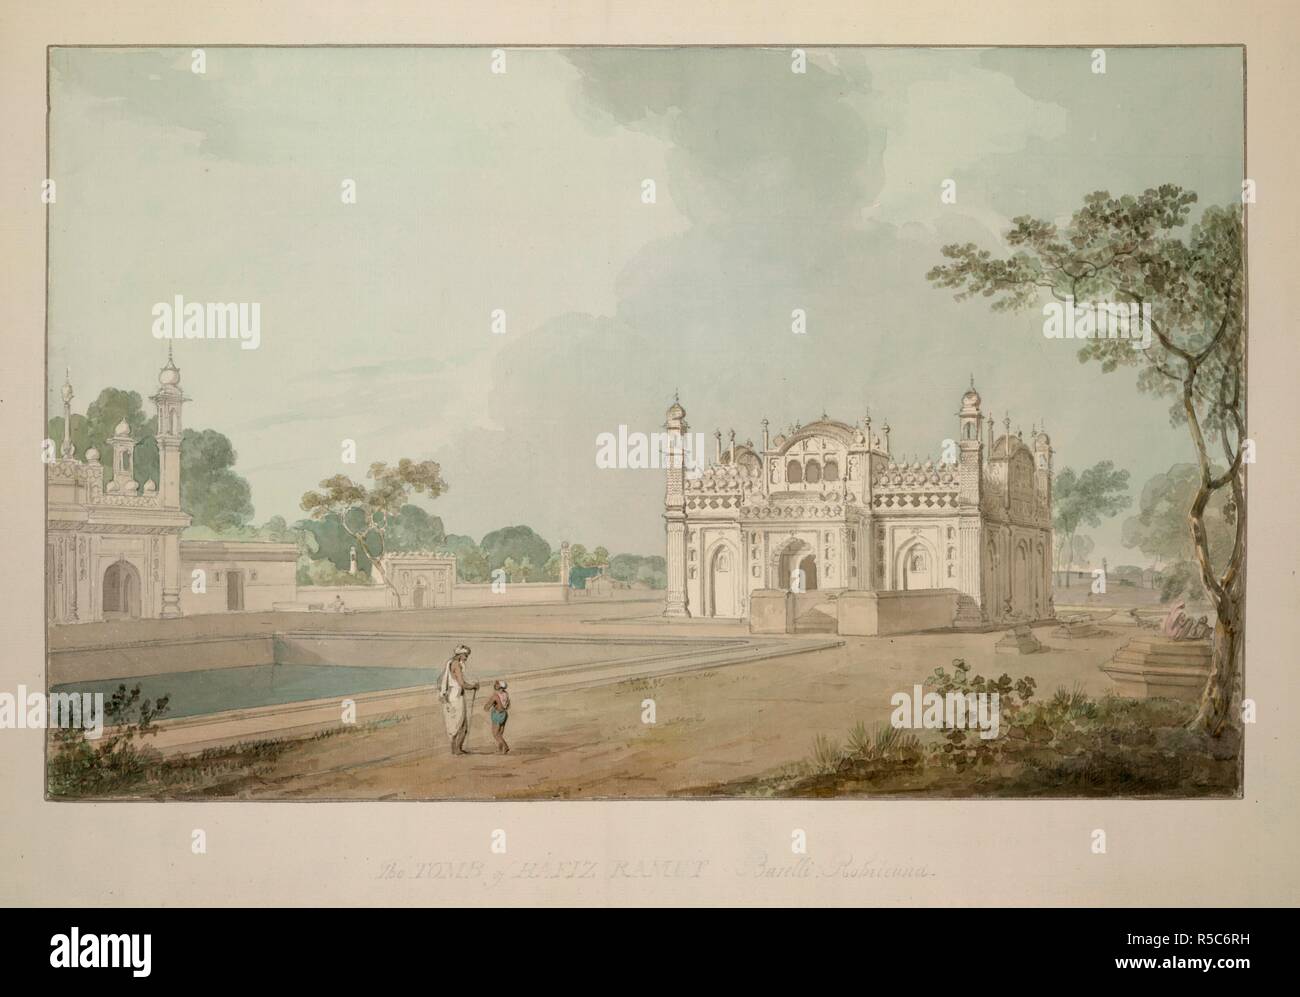 The Tomb of Hafiz Rahmat Khan, Bareilly (U.P.). 22nd May 1789. Bromley-Davenport Collection. 1789. pencil; watercolour. Source: WD 187. Language: English. Author: DANIELL, WILLIAM. DANIELL, THOMAS. Stock Photo